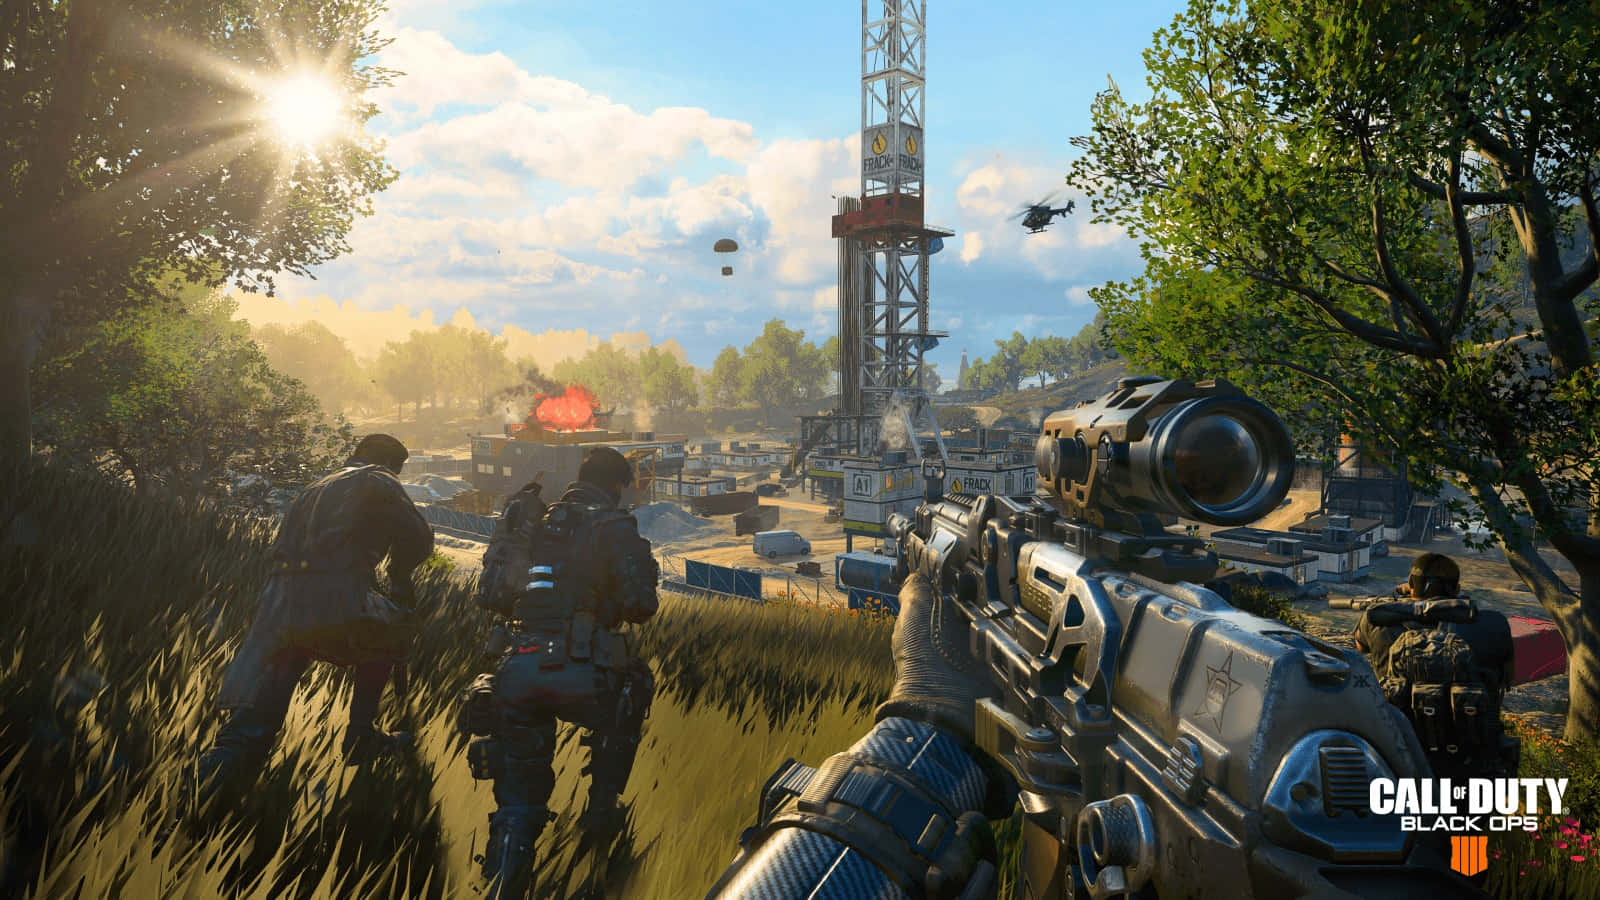 Intense Call of Duty battle scene in first-person view Wallpaper